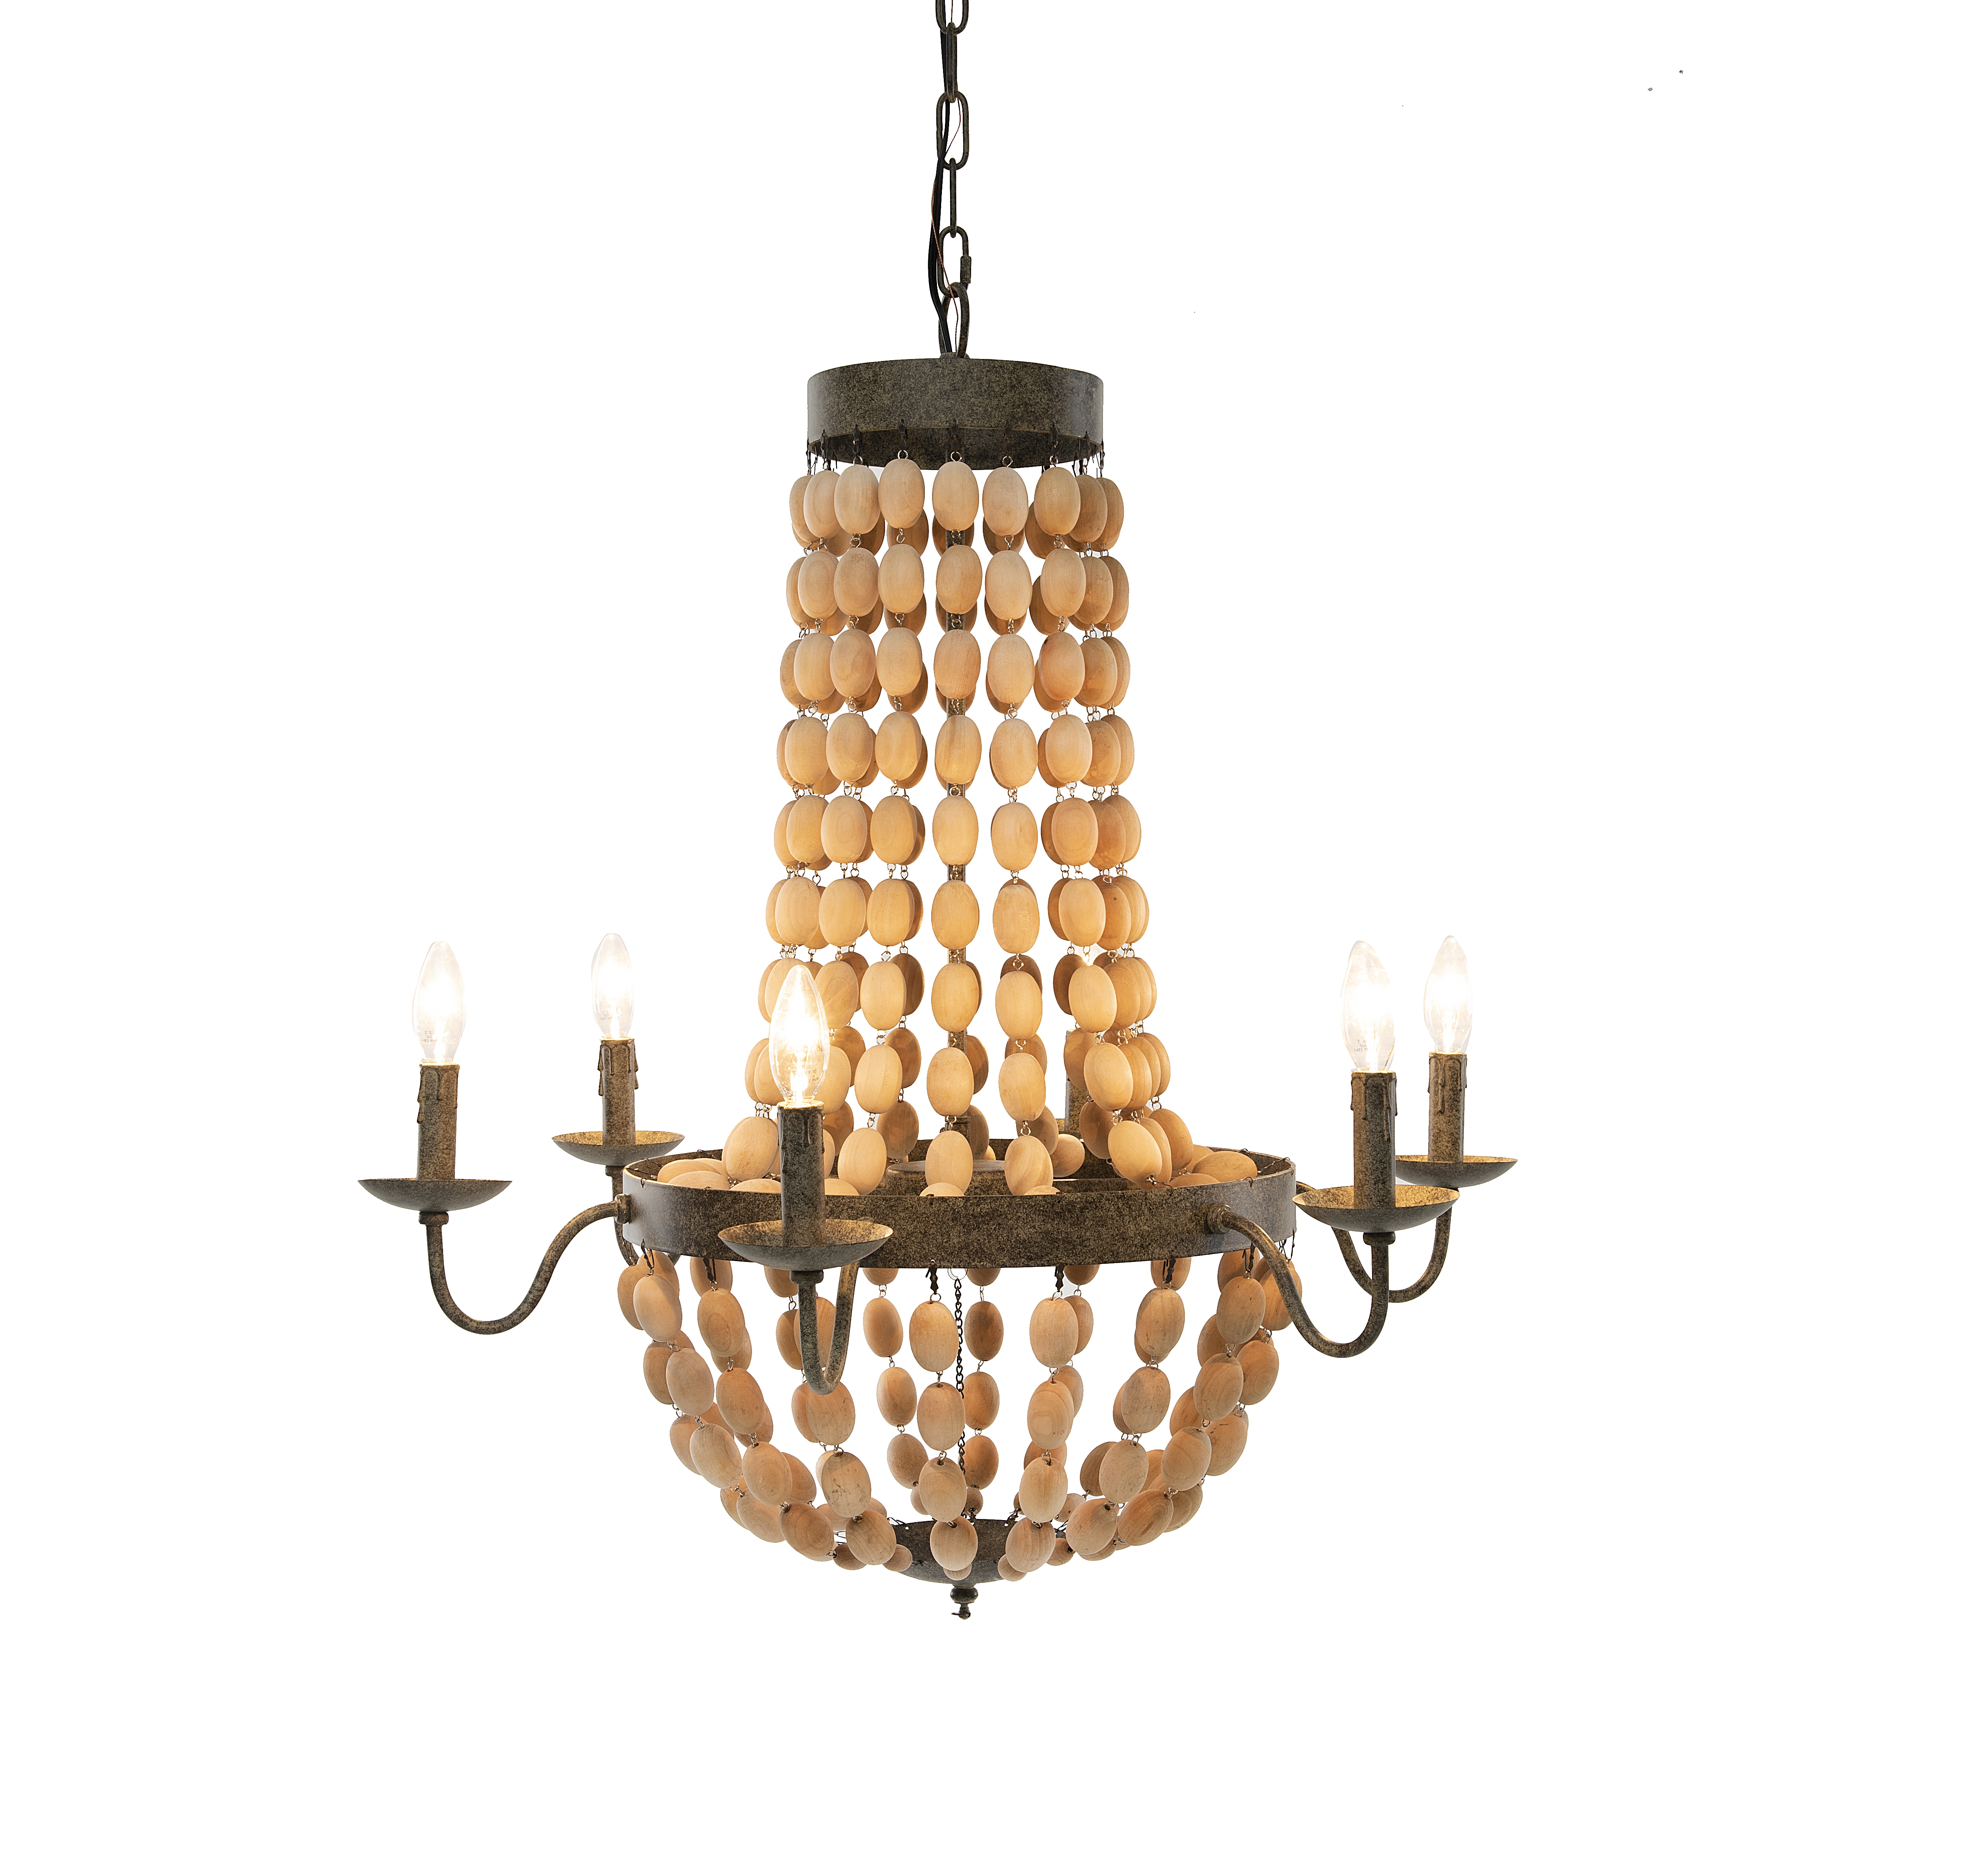 Metal Chandelier with Brown Wood Beads & 6 Lights - Image 0